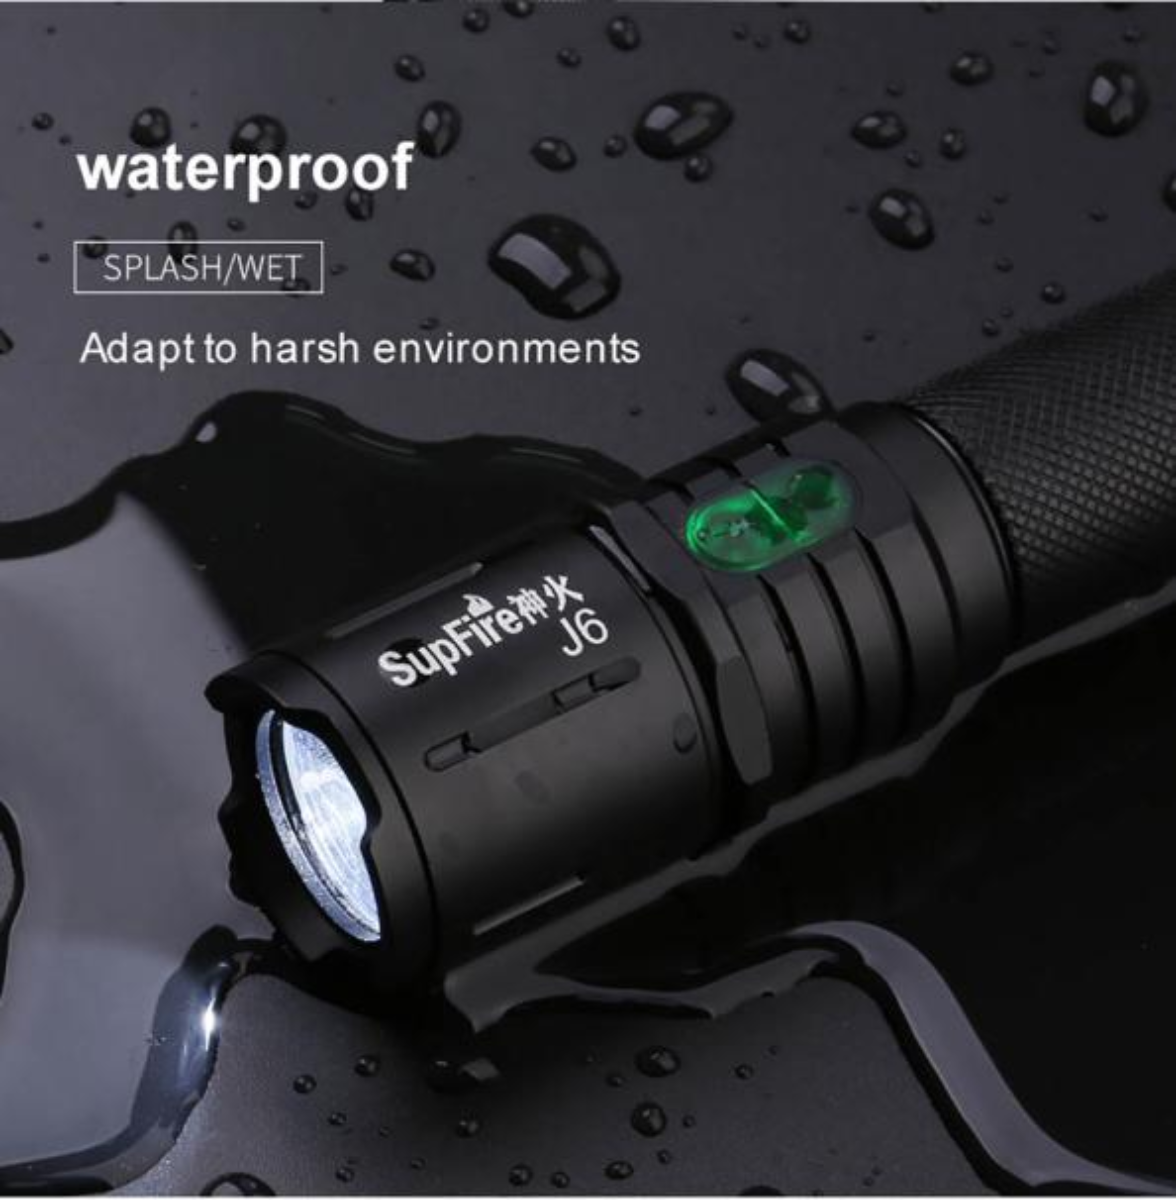 LED Flashlights For Emergency Situations: All About Survival Lights